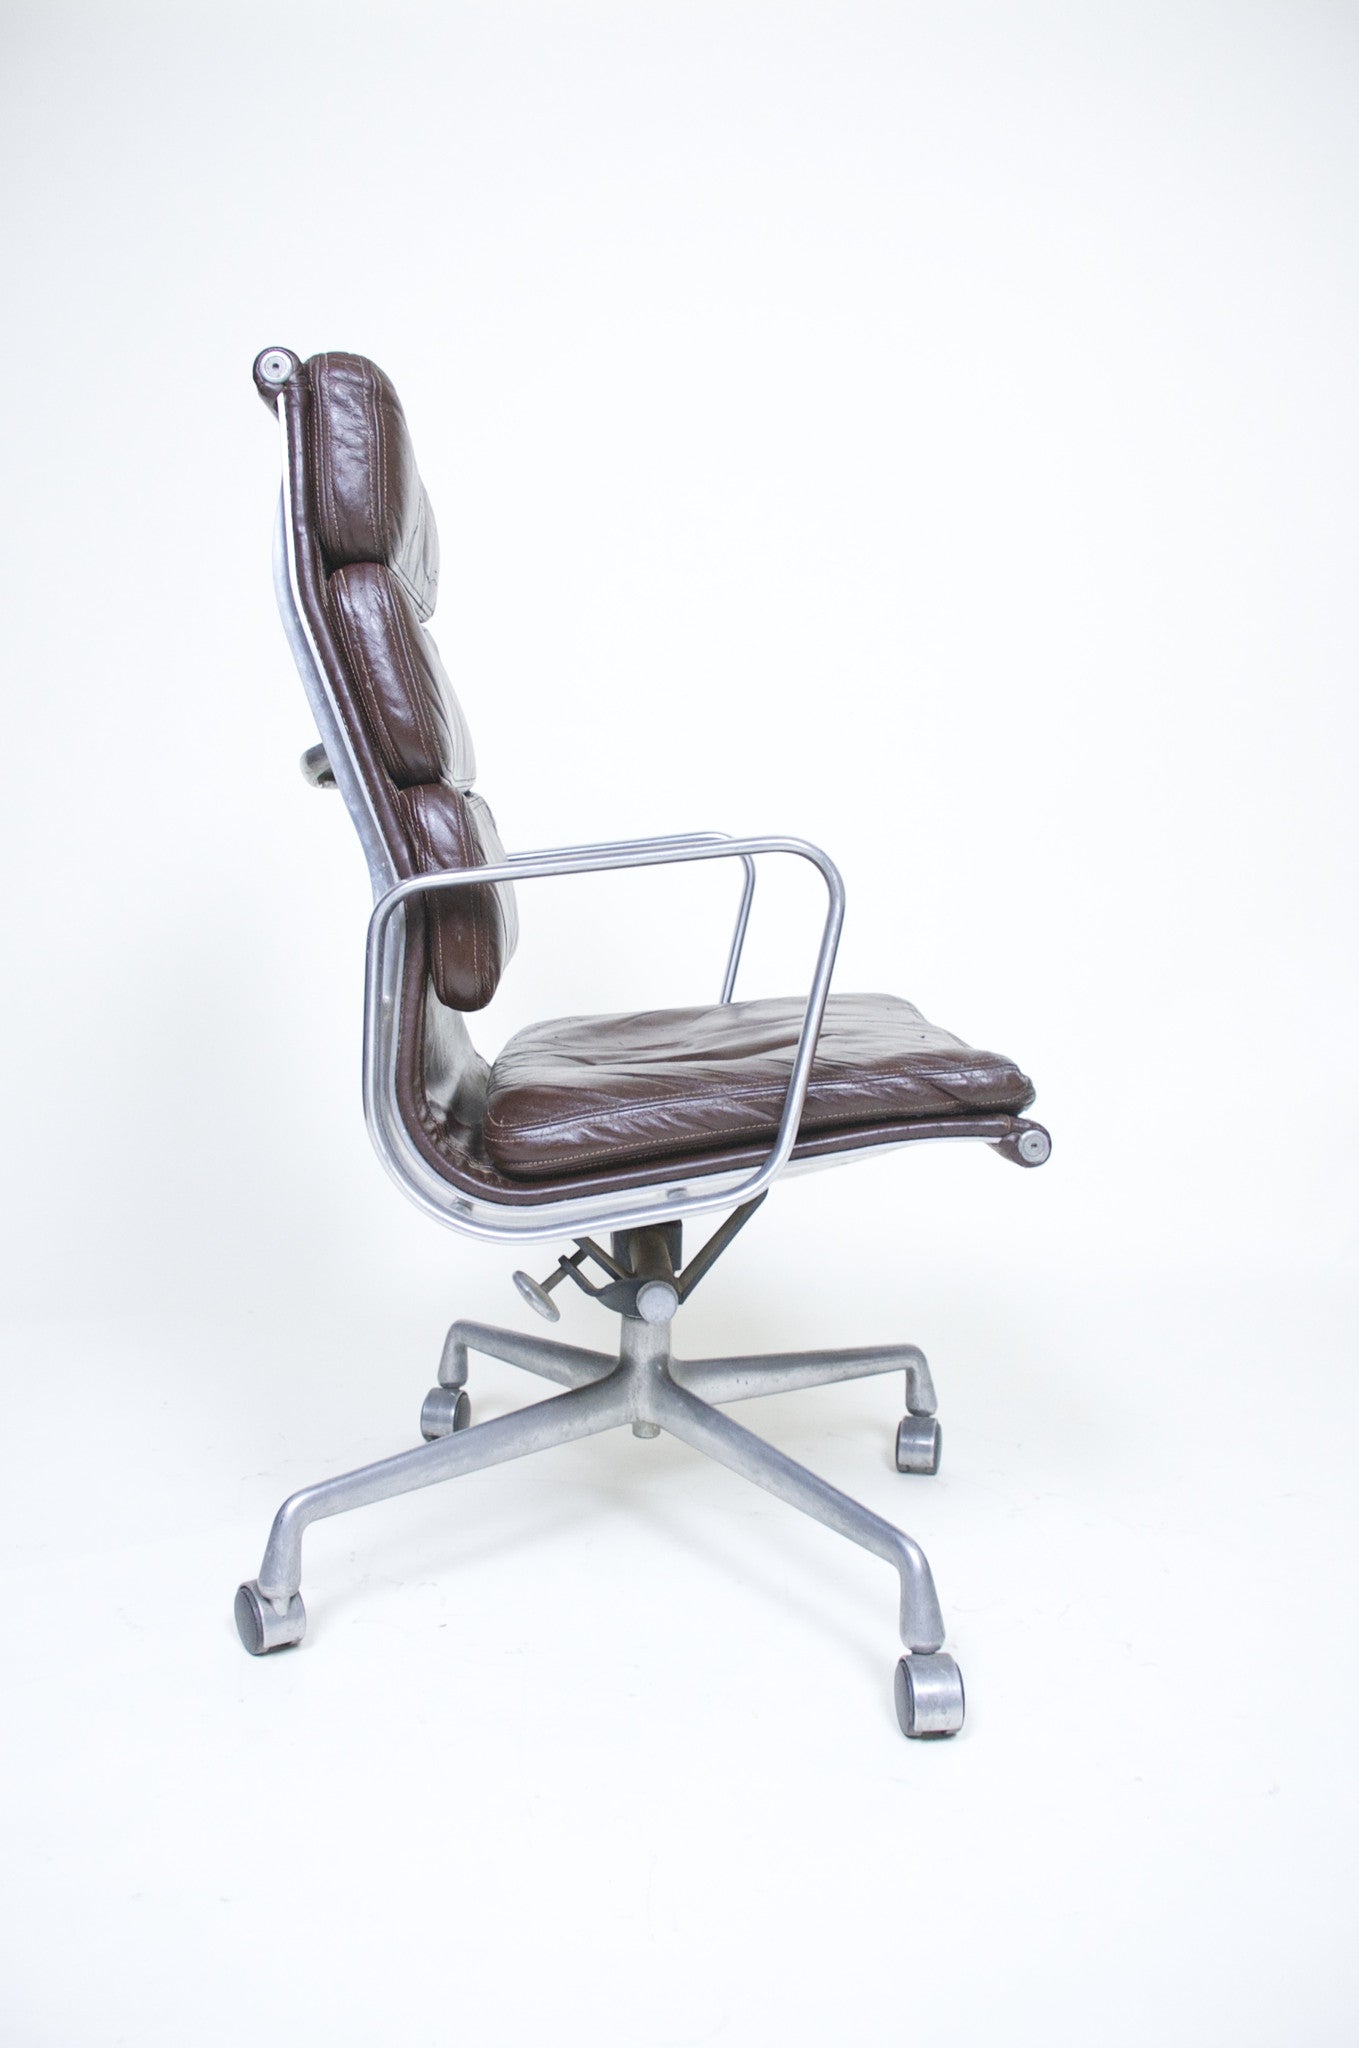 SOLD Eames Herman Miller 1970's Soft Pad Aluminum Group Executive Chair Brown